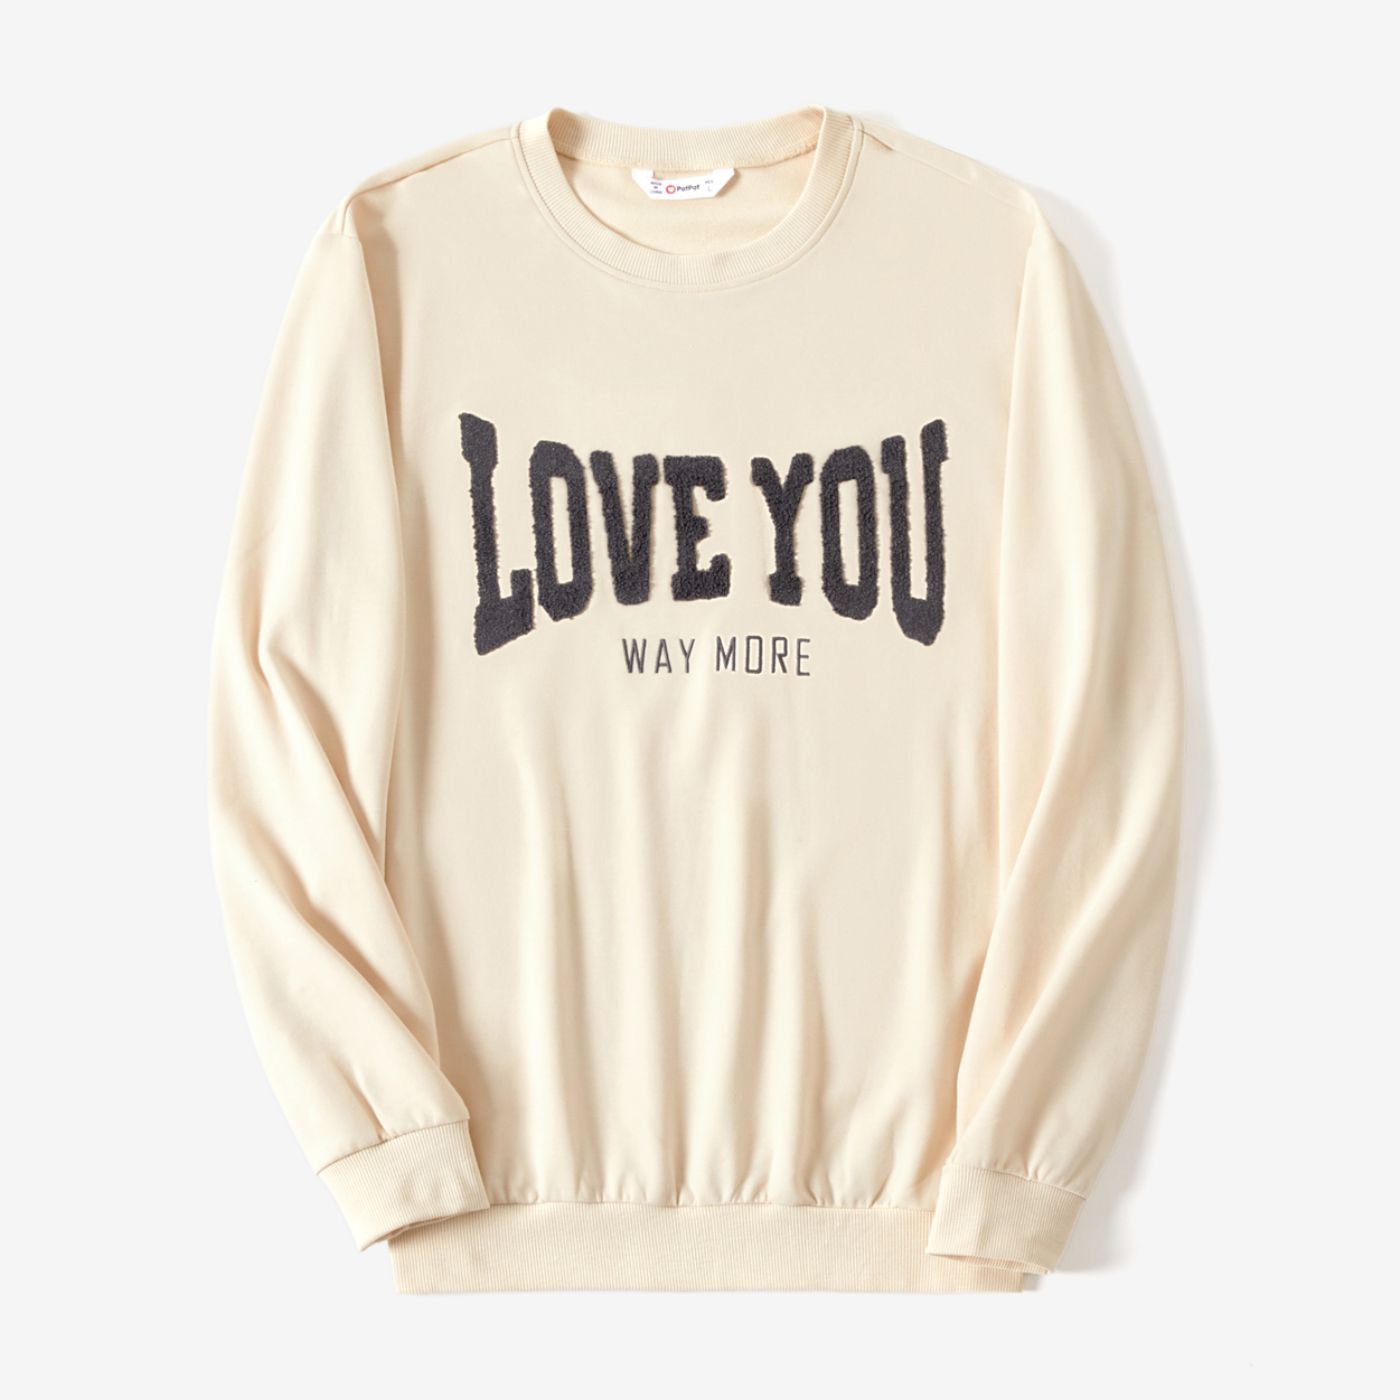 Family Matching Casual Solid Color Letters Embroidered Long Sleeve Tops